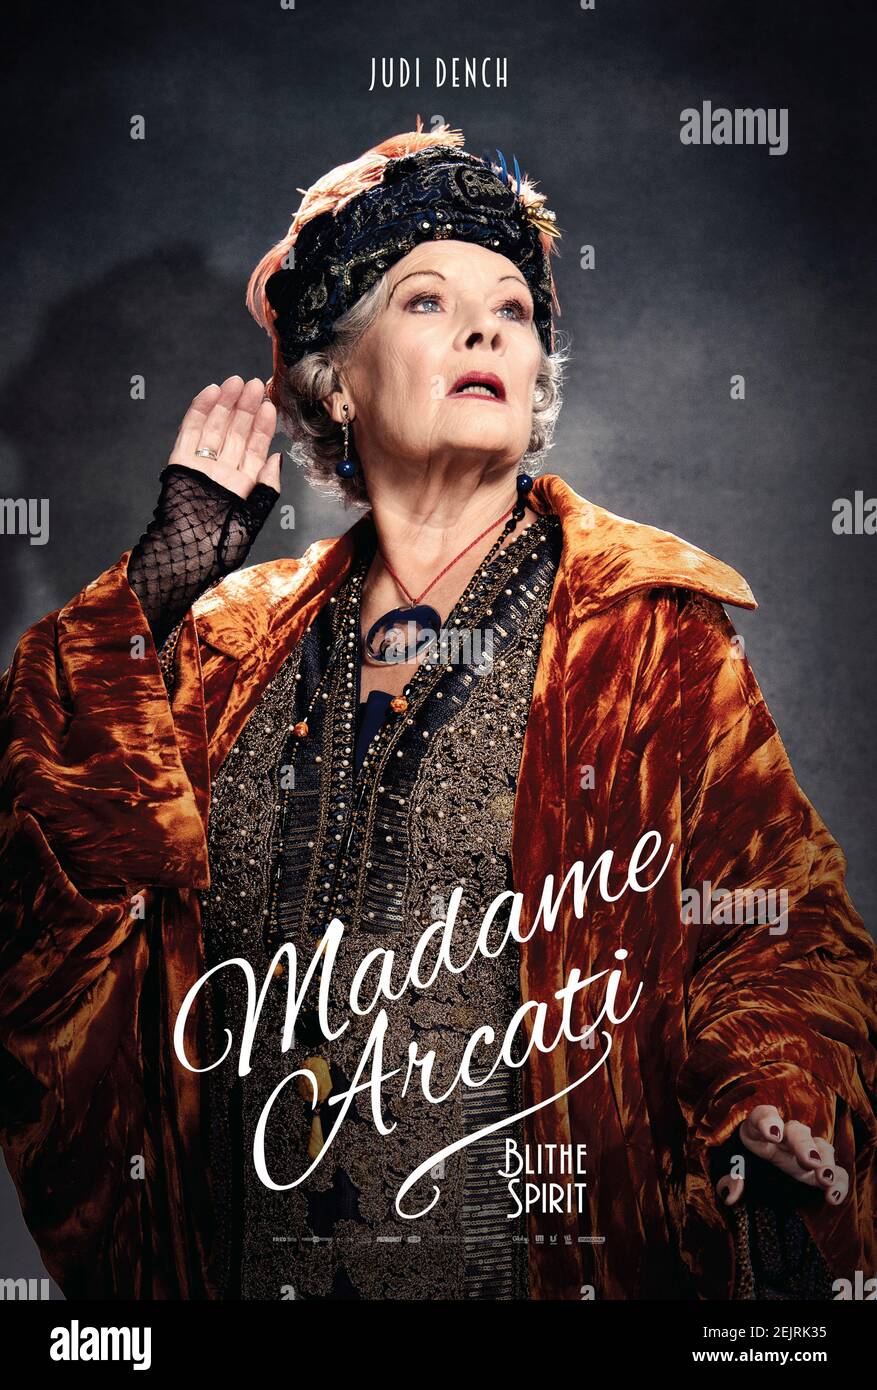 Blithe Spirit (2020) directed by Edward Hall and starring Judi Dench as Madame Cecily Arcati in an adaption of Noël Coward's much loved stage play about a spiritualist medium holds a seance for a writer suffering from writer's block. Stock Photo